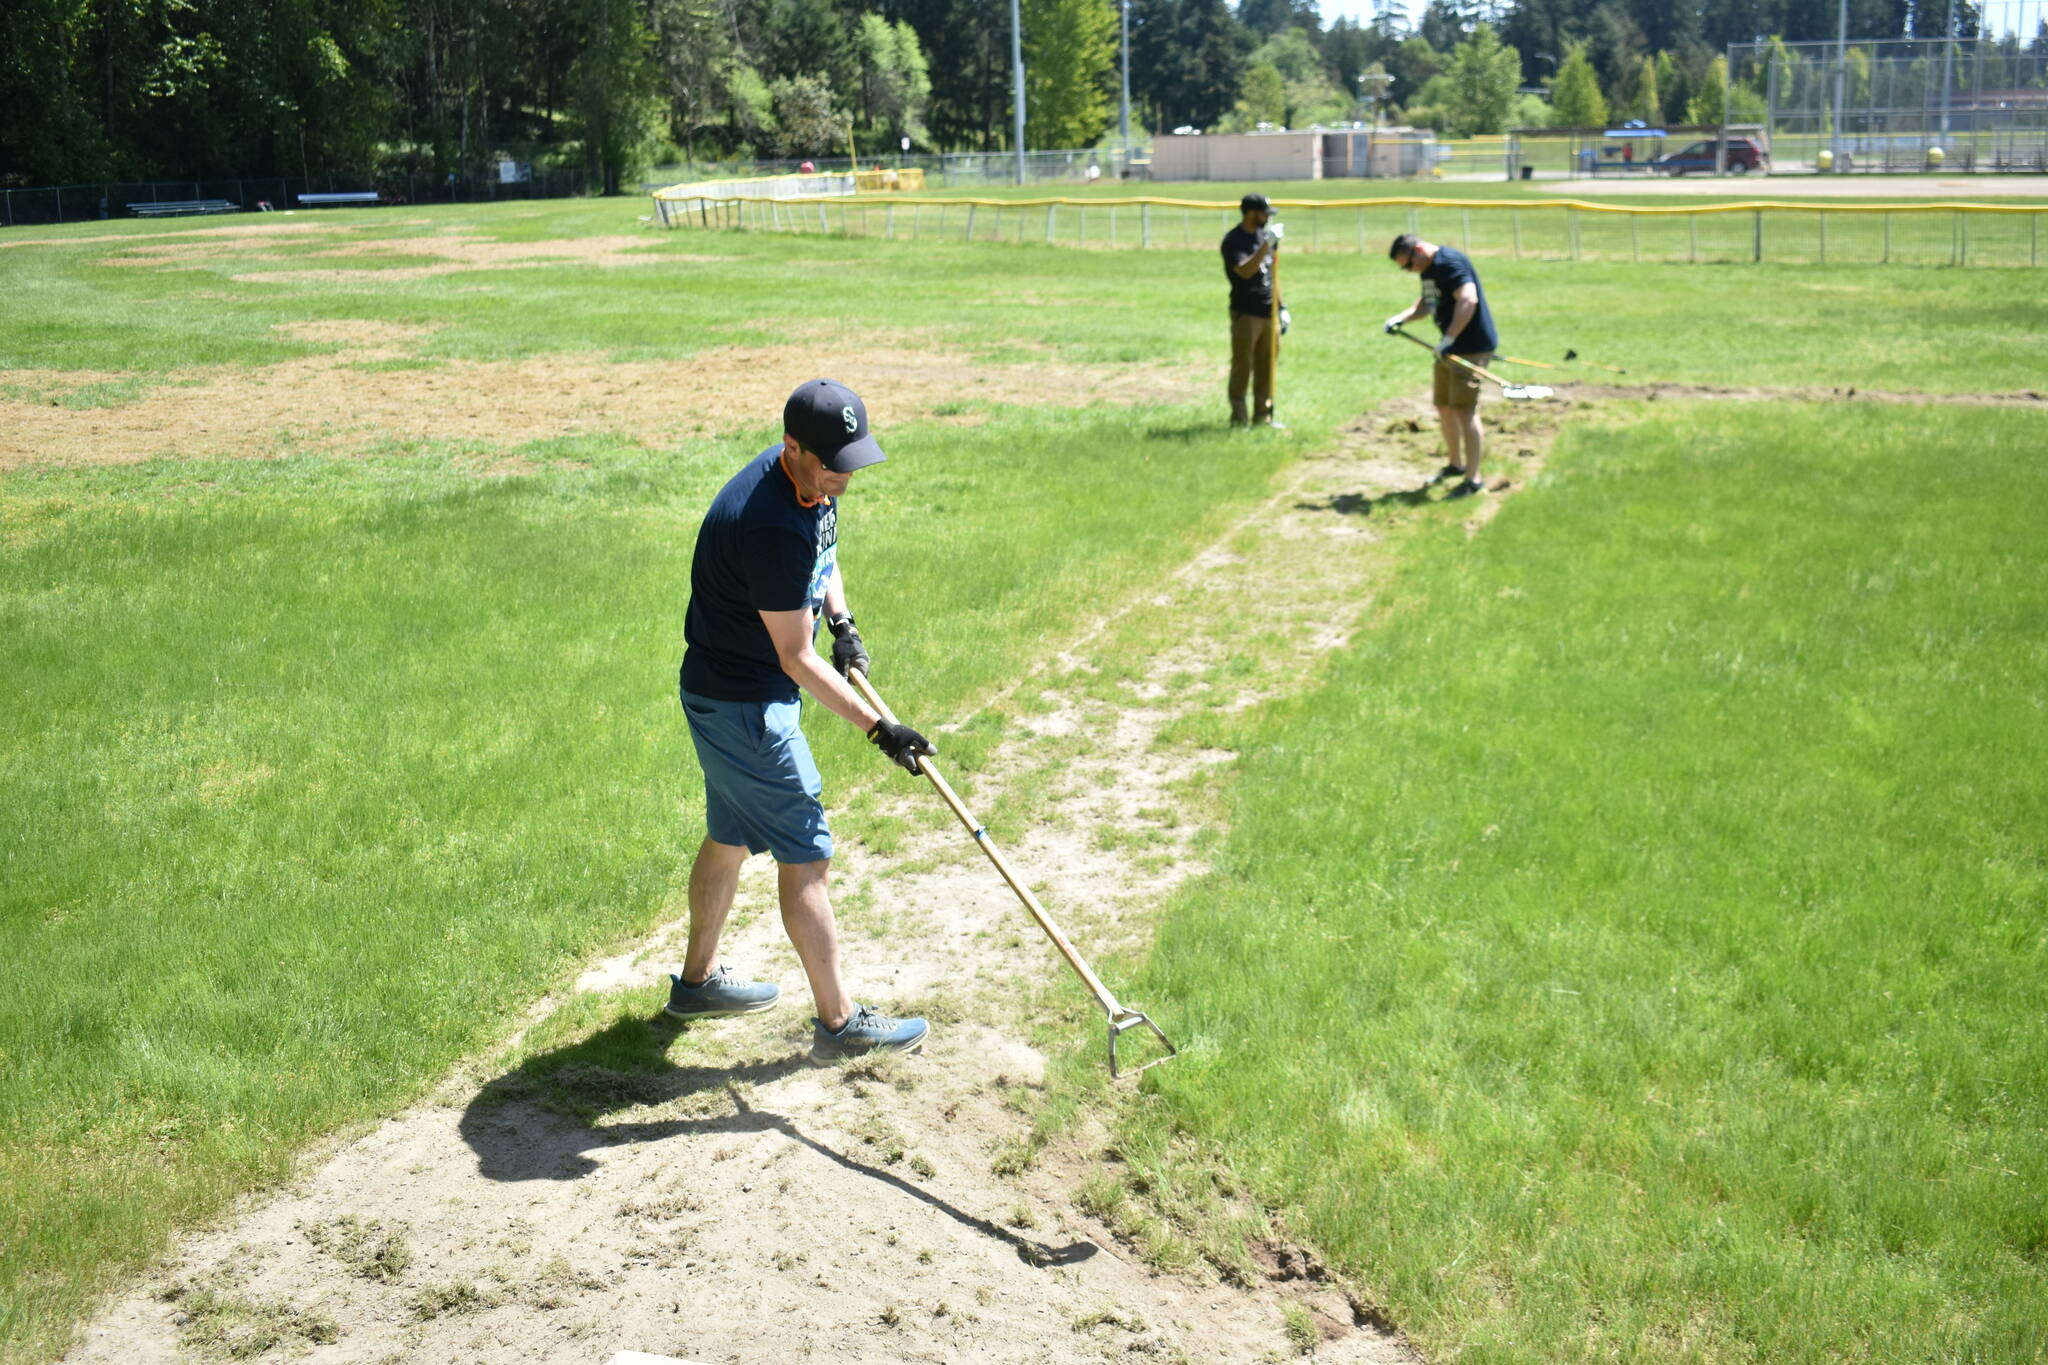 Volunteers helping out on Federal Way National field 4. Ben Ray/ The Mirror